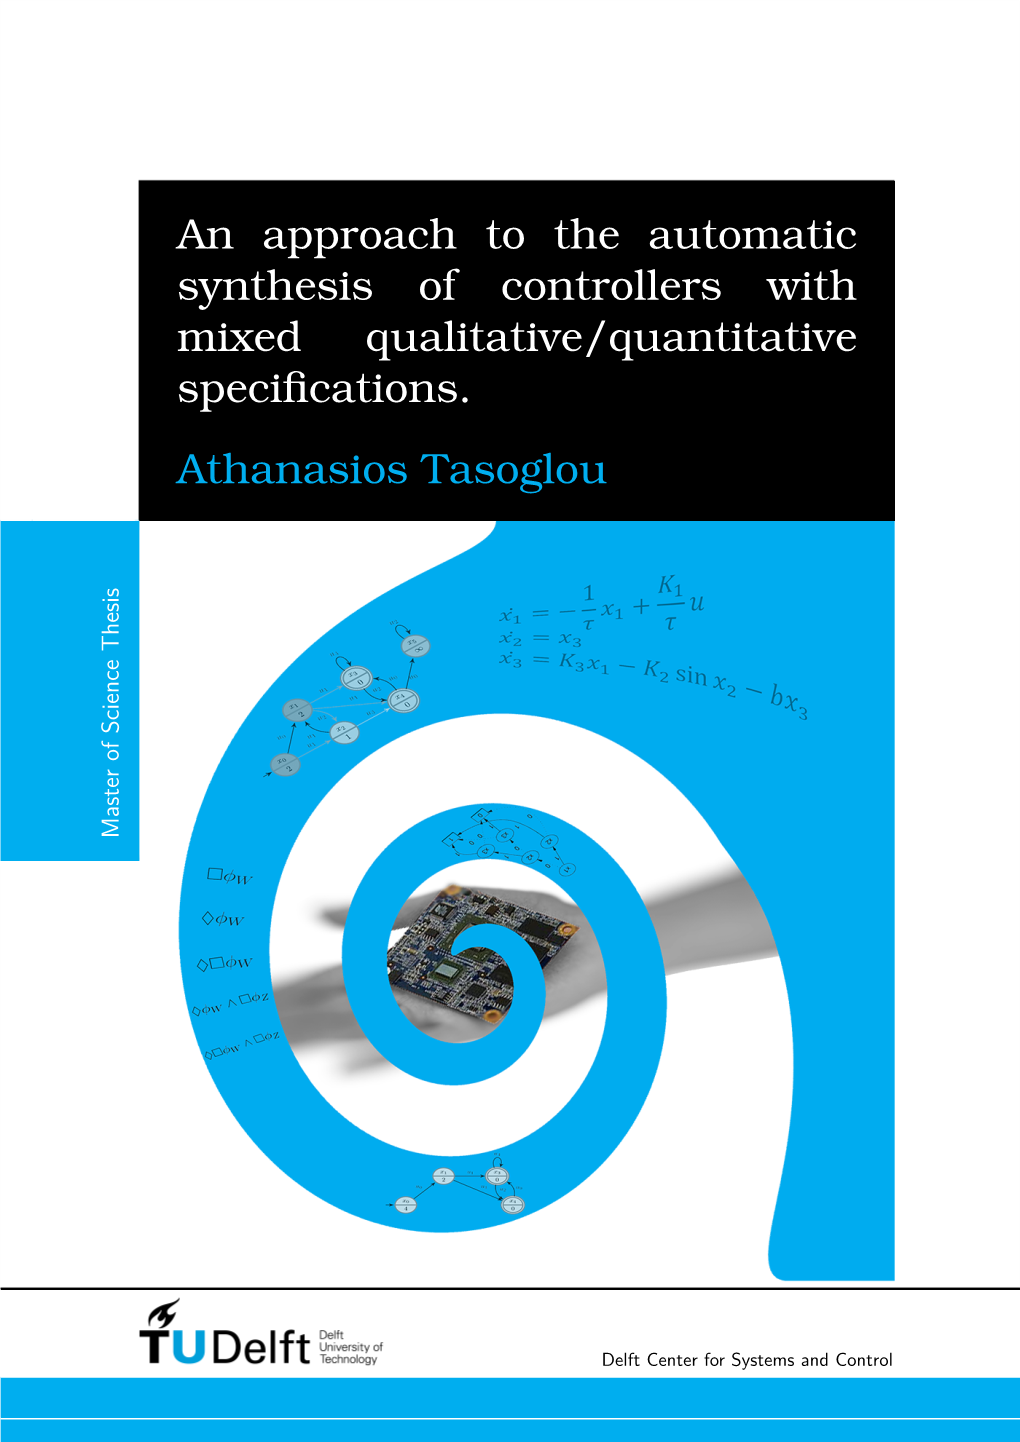 Masters Thesis: an Approach to the Automatic Synthesis of Controllers with Mixed Qualitative/Quantitative Specifications